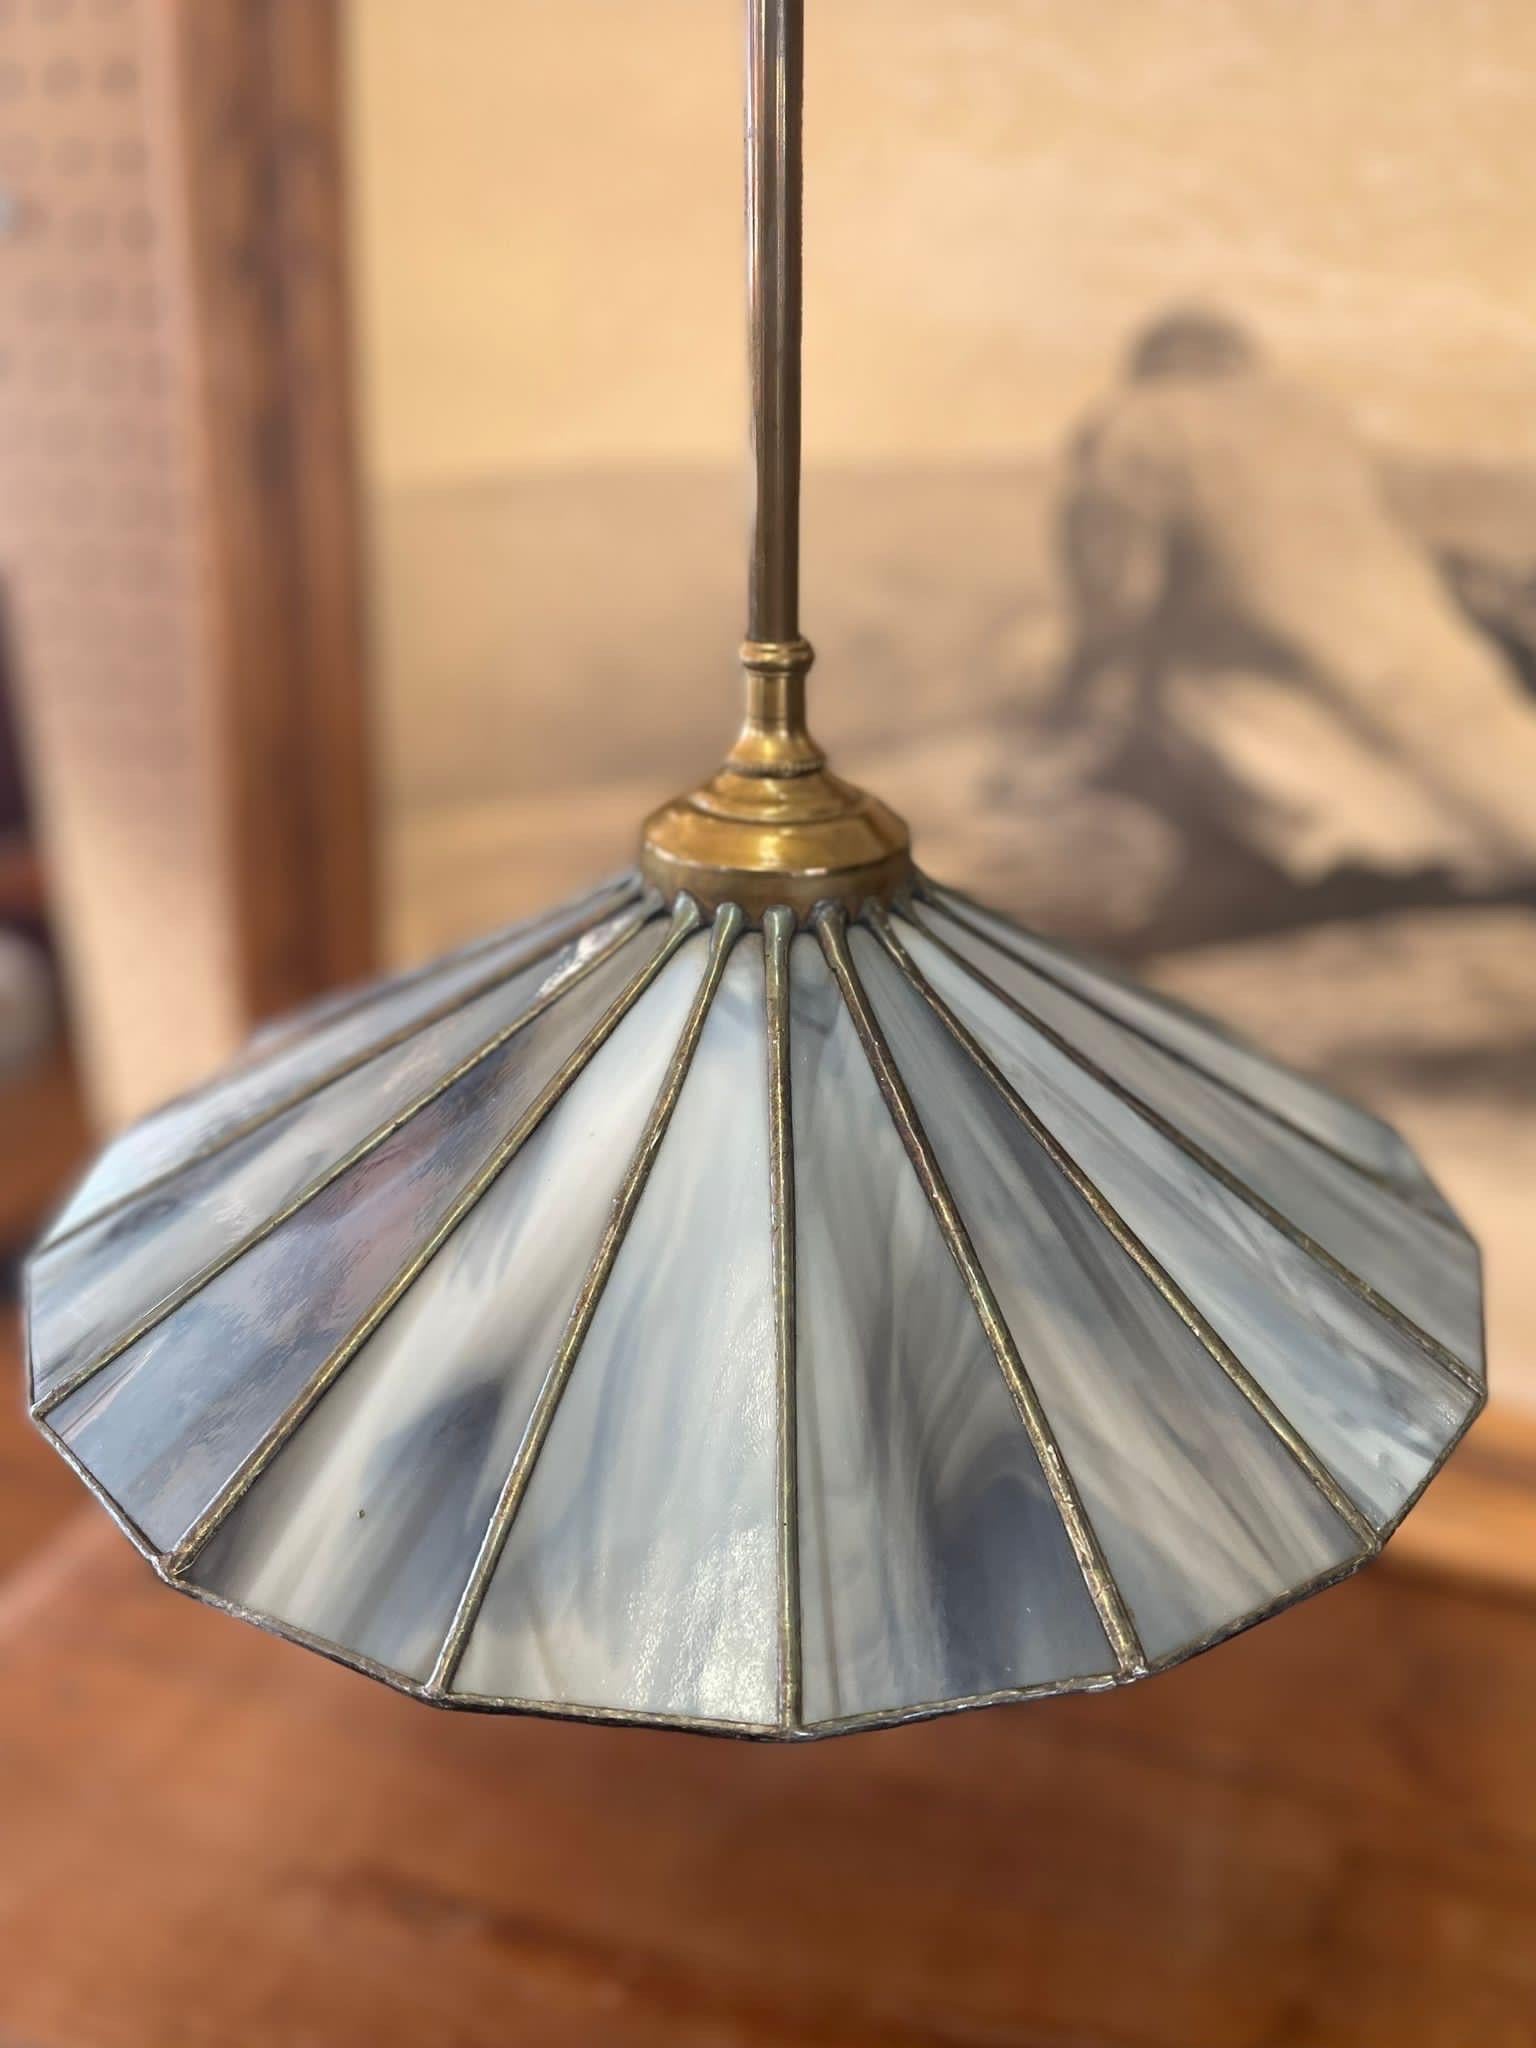 Vintage Parasol Pendant Light With Blue Stained Glass Shade In Good Condition For Sale In Seattle, WA